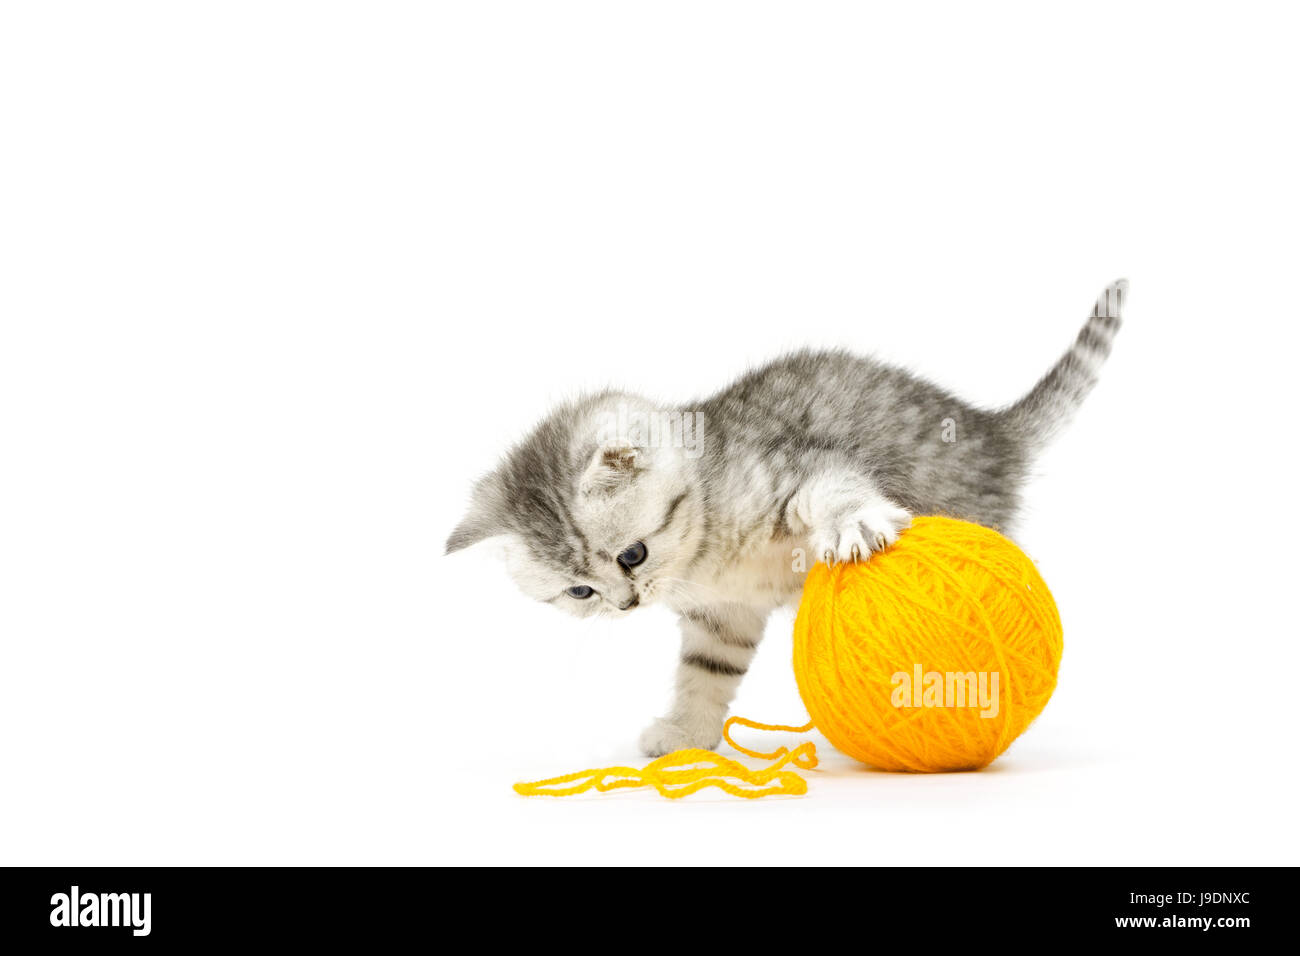 pet, cat eyes, cat baby, kitten, young, younger, pussycat, cat, domestic cat, Stock Photo